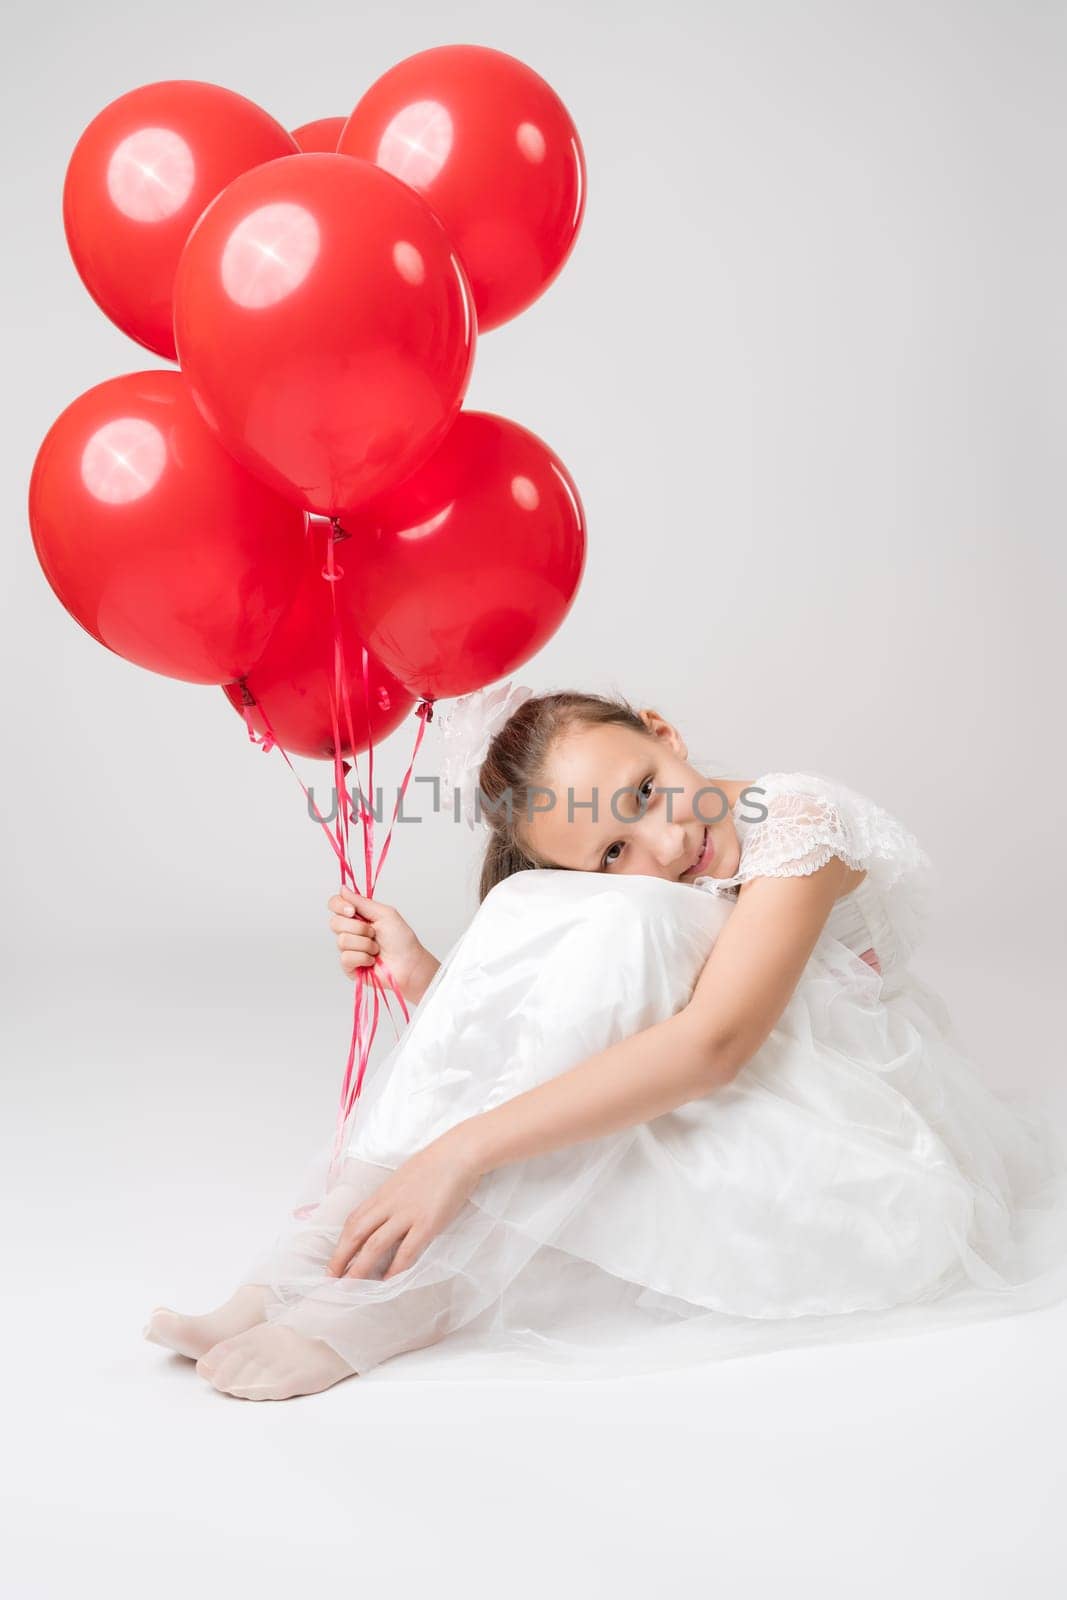 Romantic girl in white dress holding lot of red balloons in hand, put head on her knees, sitting on white background and smiles looking at camera. Studio shot. Part of photo series.